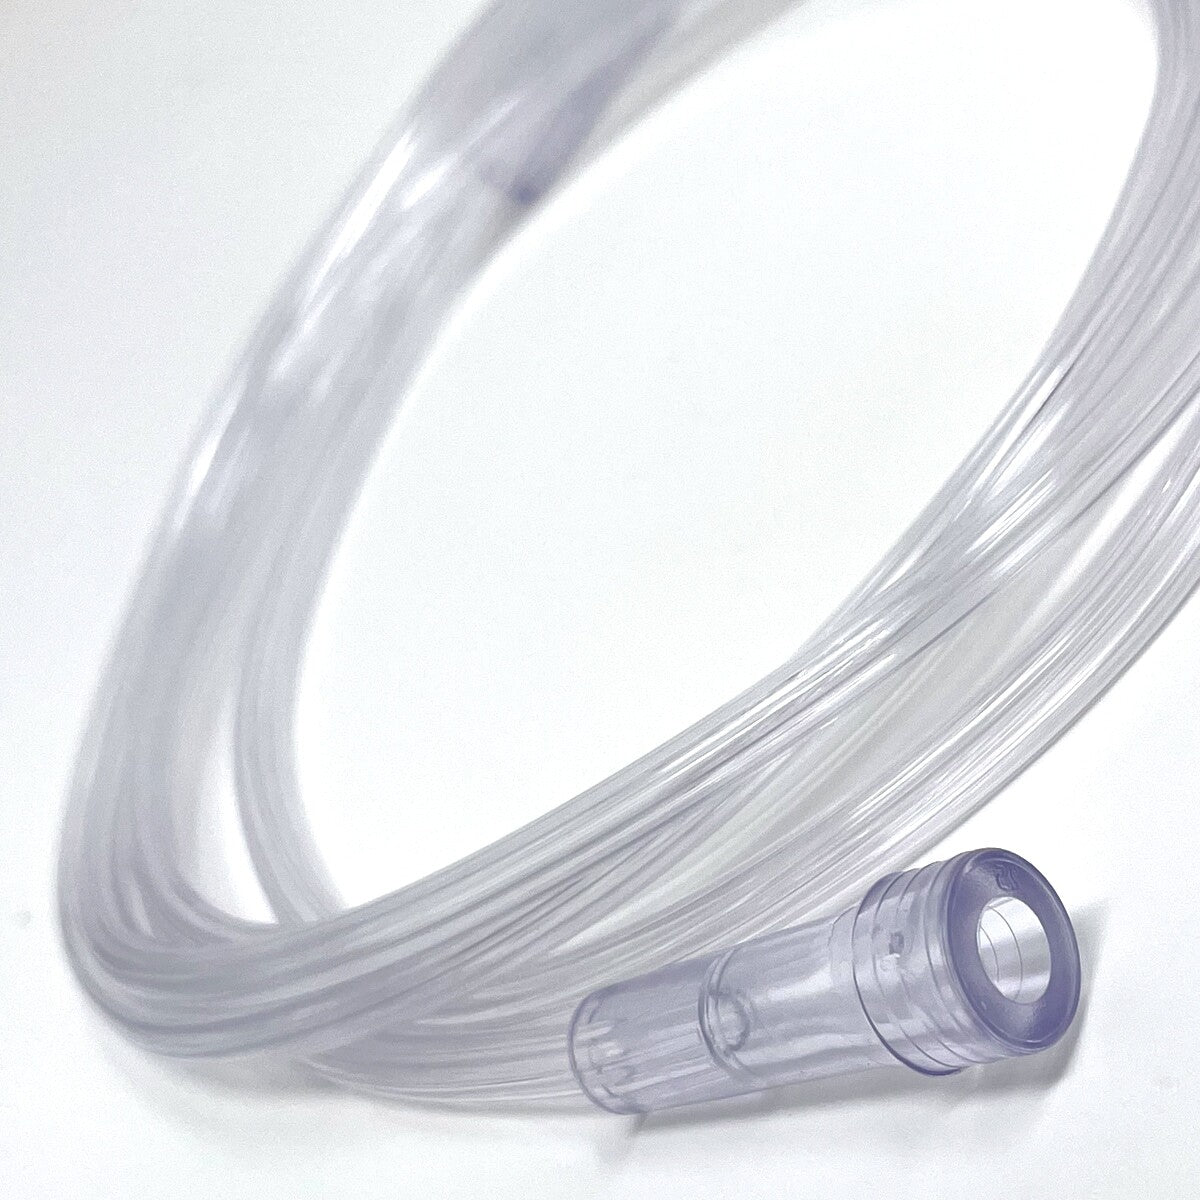 WestMed CLEAR Kink & Crush Resistant Oxygen Supply Tubing - DISCONTINUED